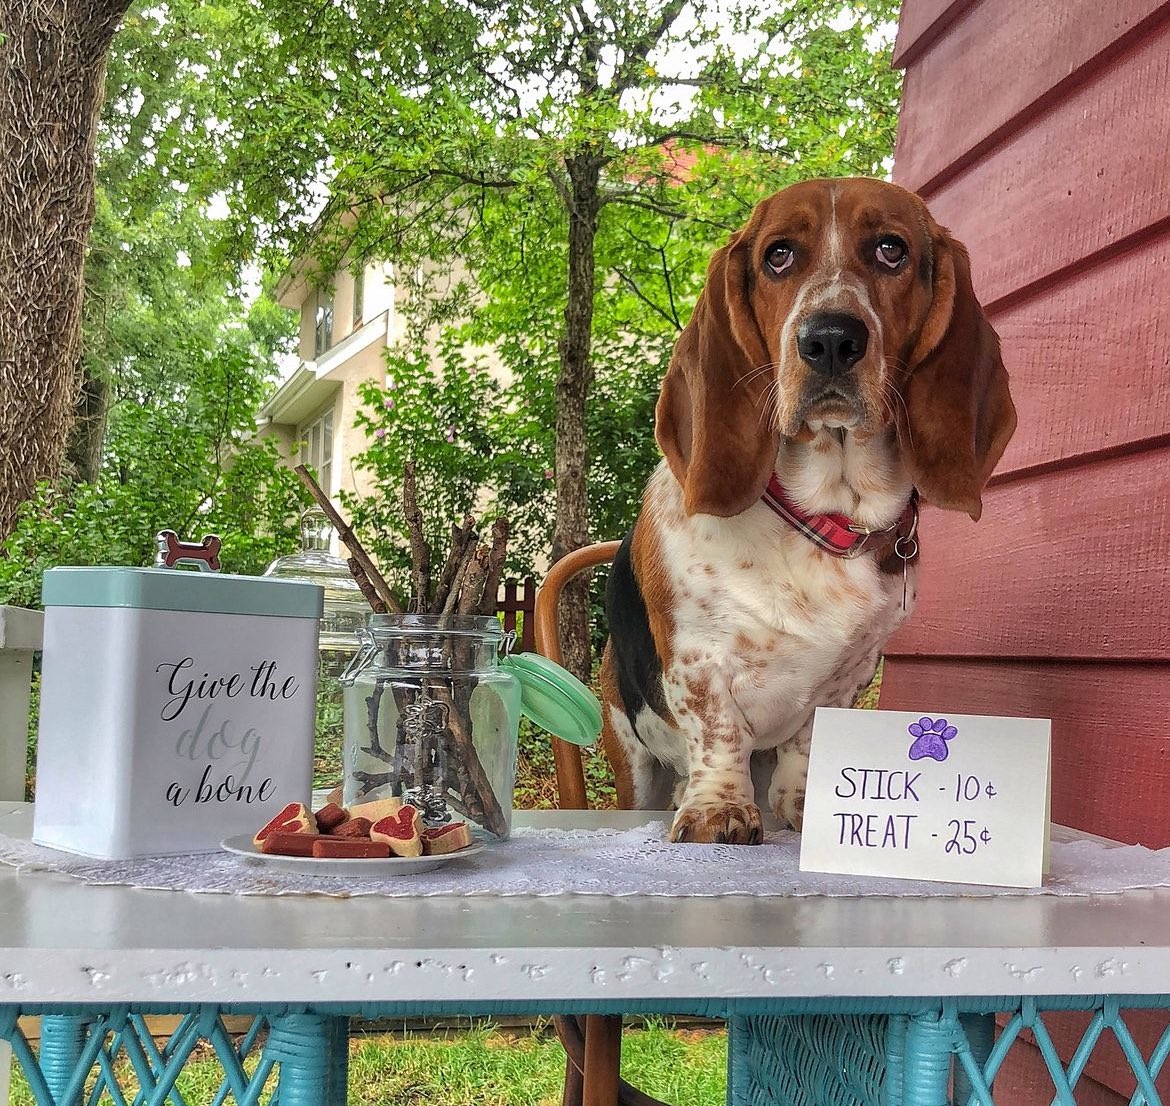 Anyone want to support a small business? 🐶 #shopsmallbusiness #smallbusinesssaturday #dog #hussle #bassethound